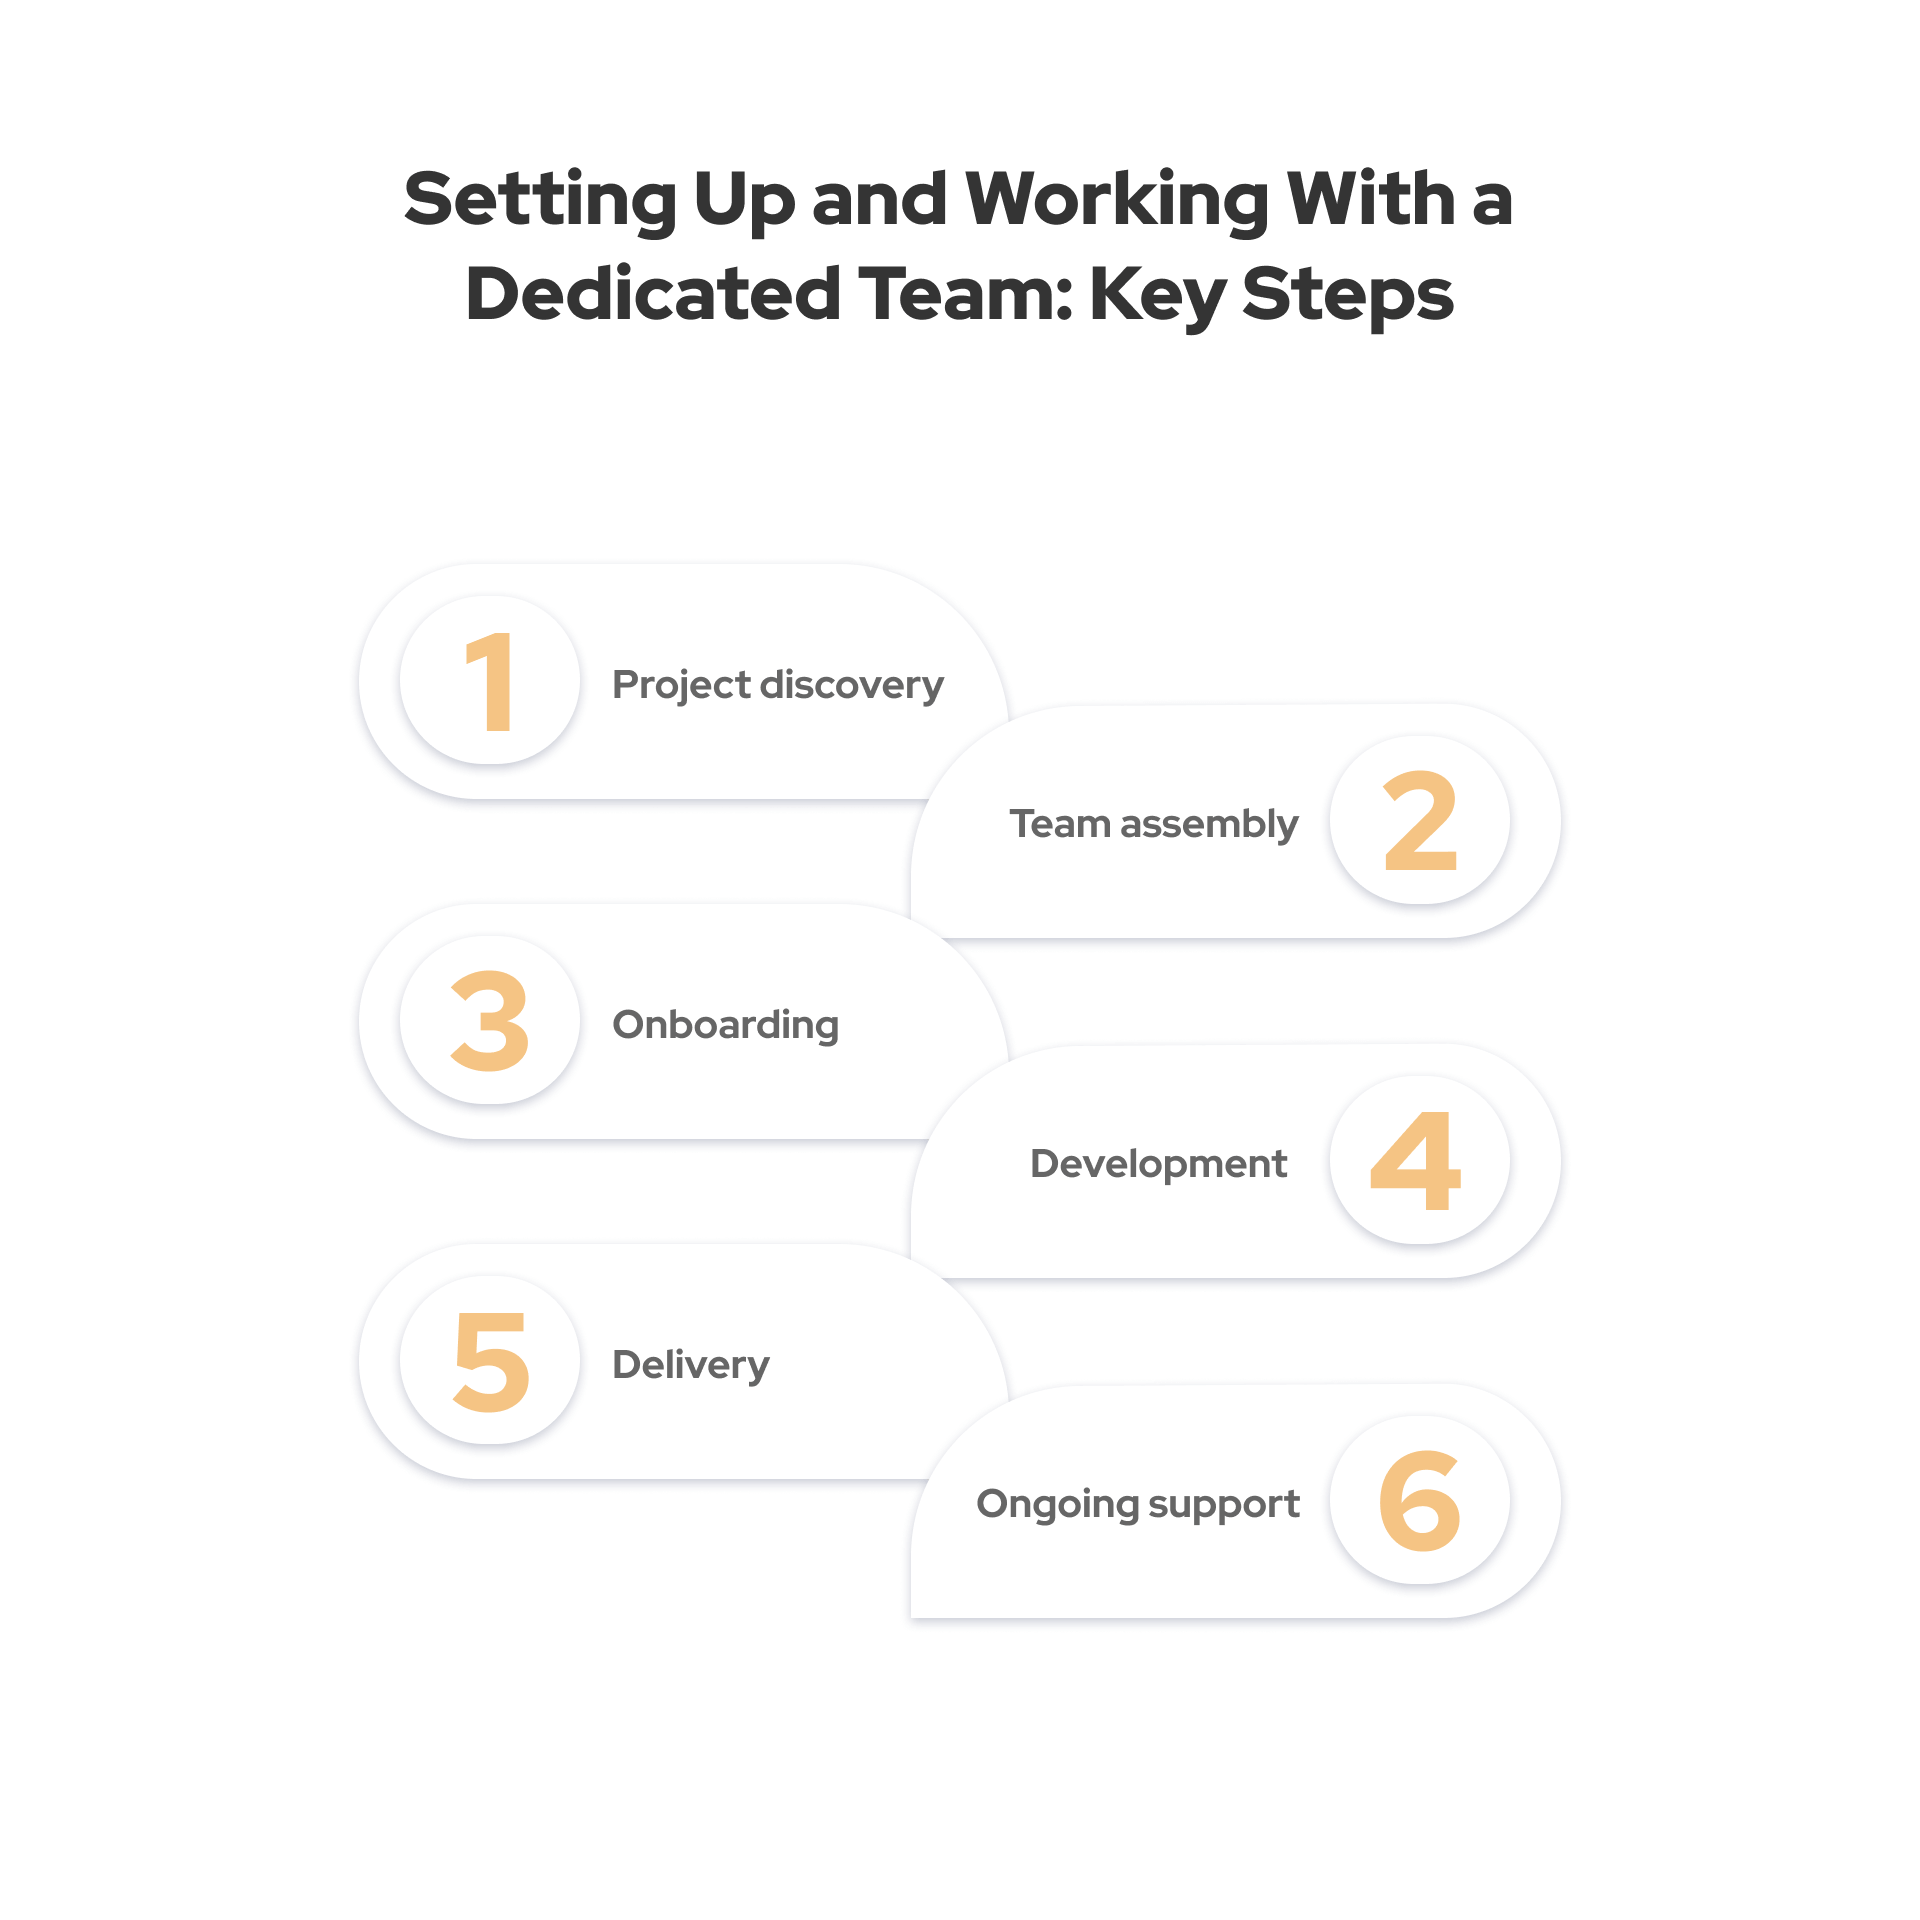 From defining clear goals and roles to establishing effective communication channels and fostering a positive team culture, we'll guide you through the essential elements of successful teamwork with a dedicated software development team.